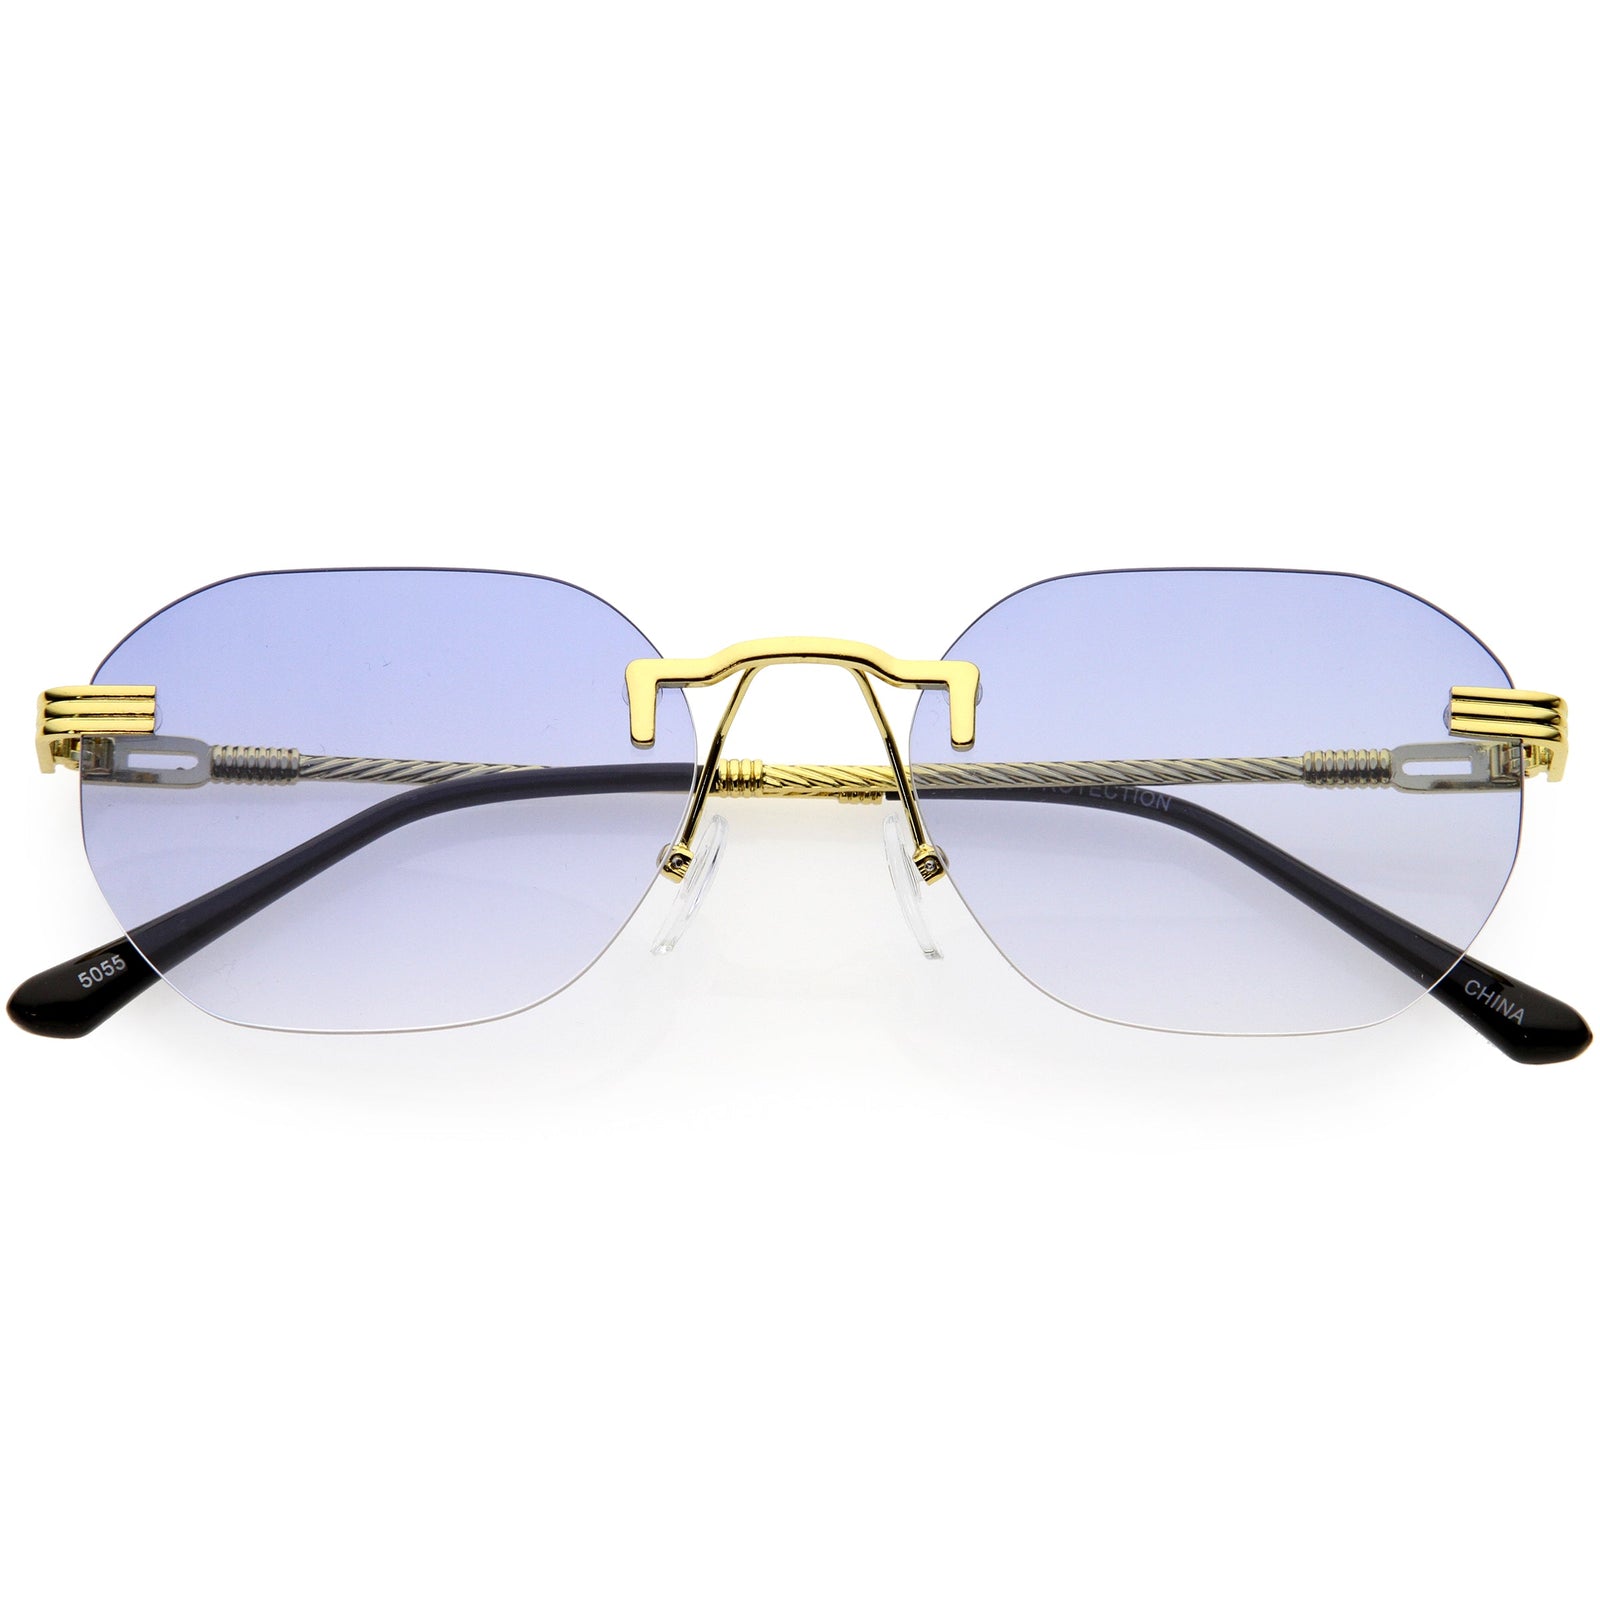 The Nineties 90s Sunglasses At Zerouv® Tagged Rimless 